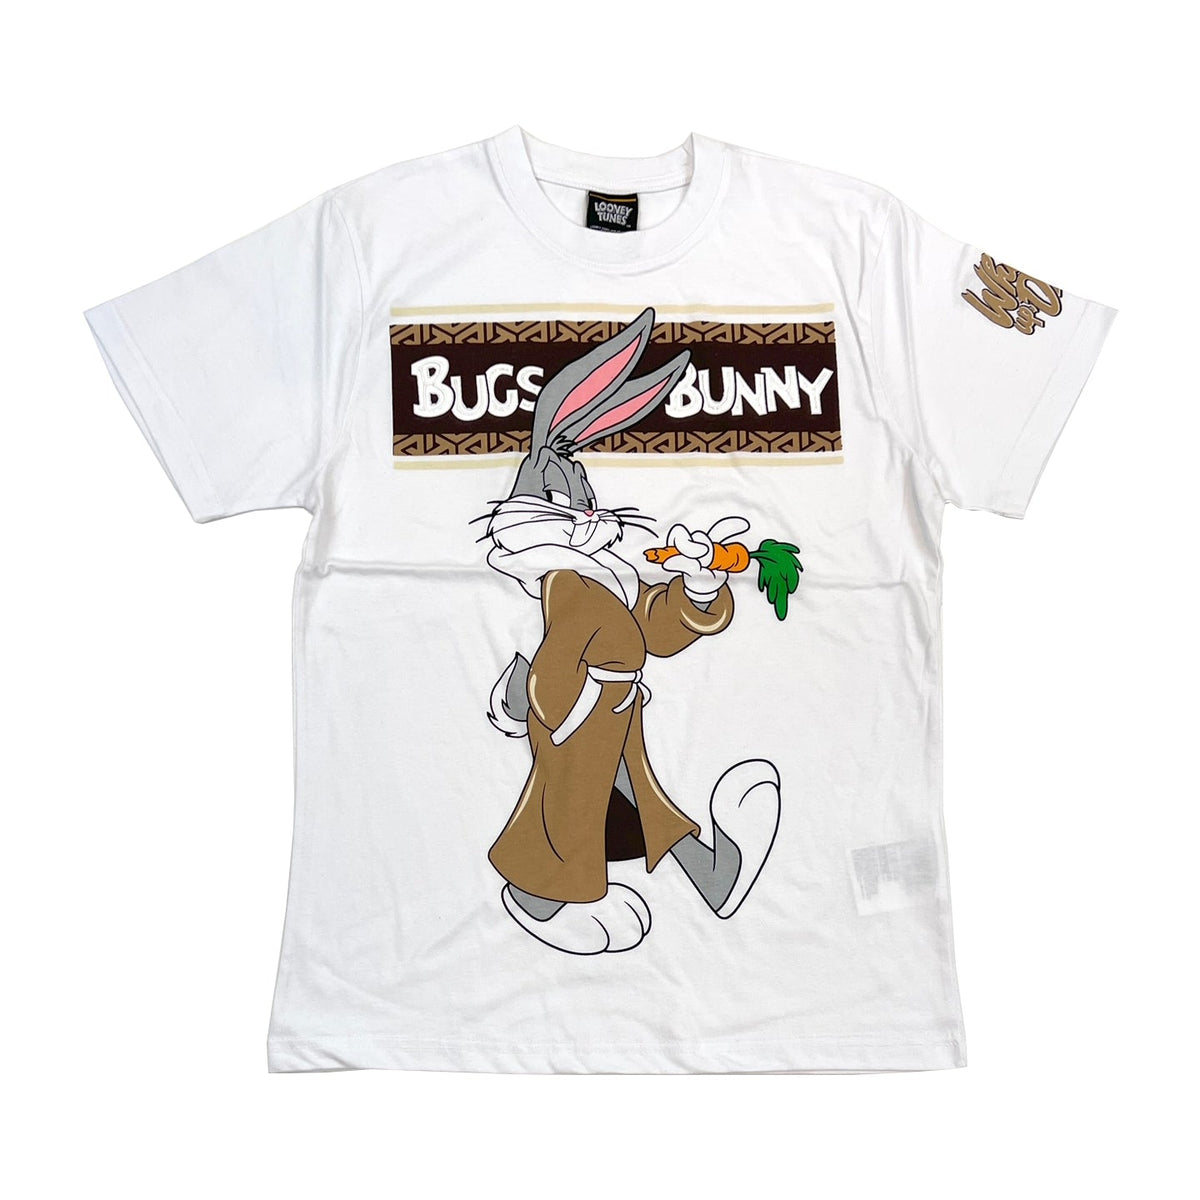 $16.99 Bunny Tunes (White) for Tee / $30 2 Looney Bugs